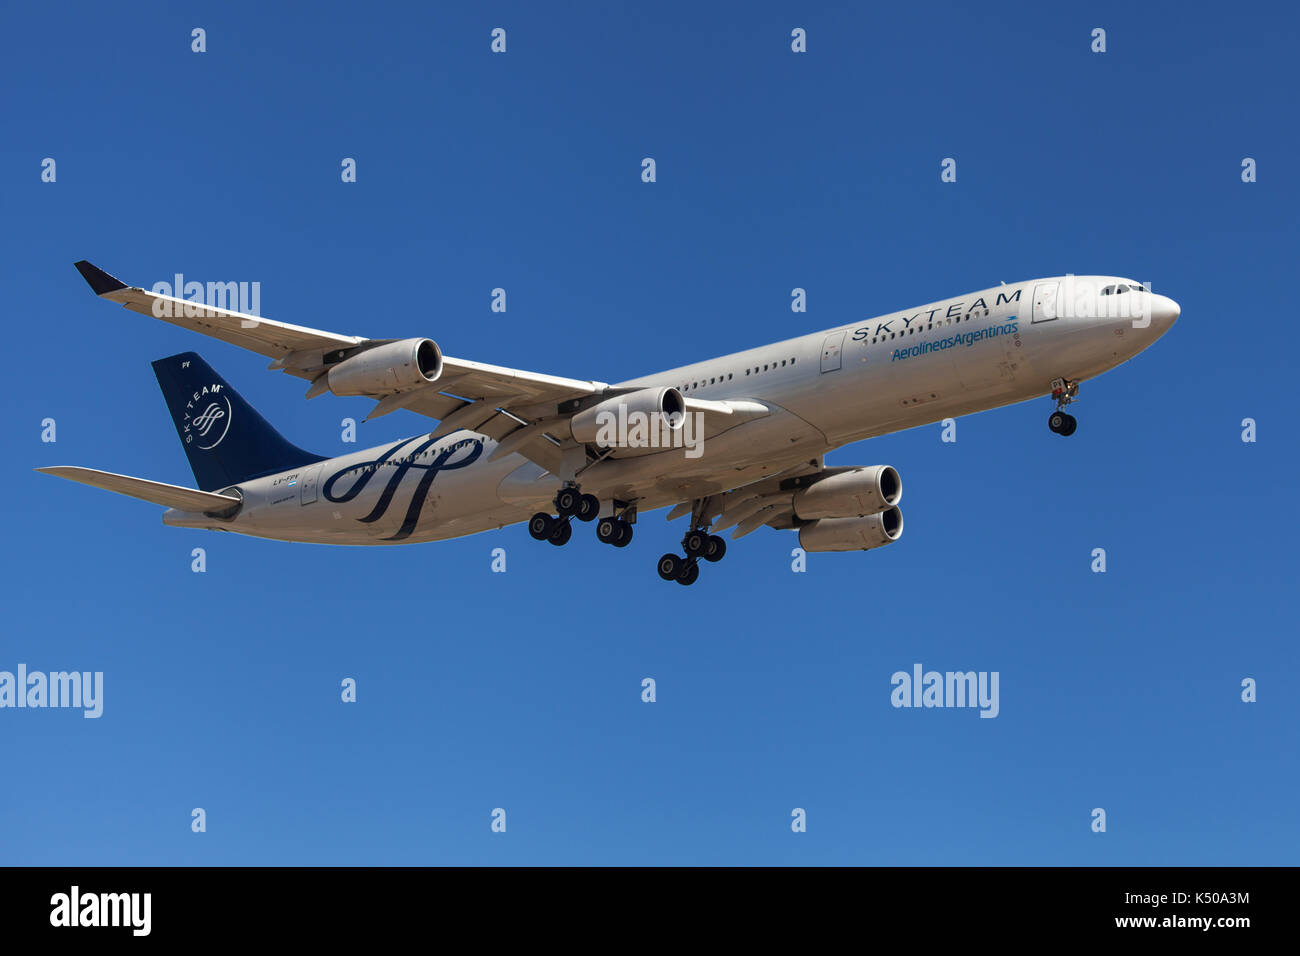 Barcelona, Spain - August 10, 2017: Aerolineas Argentinas Airbus A340-300 with Skyteam livery approaching to El Prat Airport in Barcelona, Spain. Stock Photo